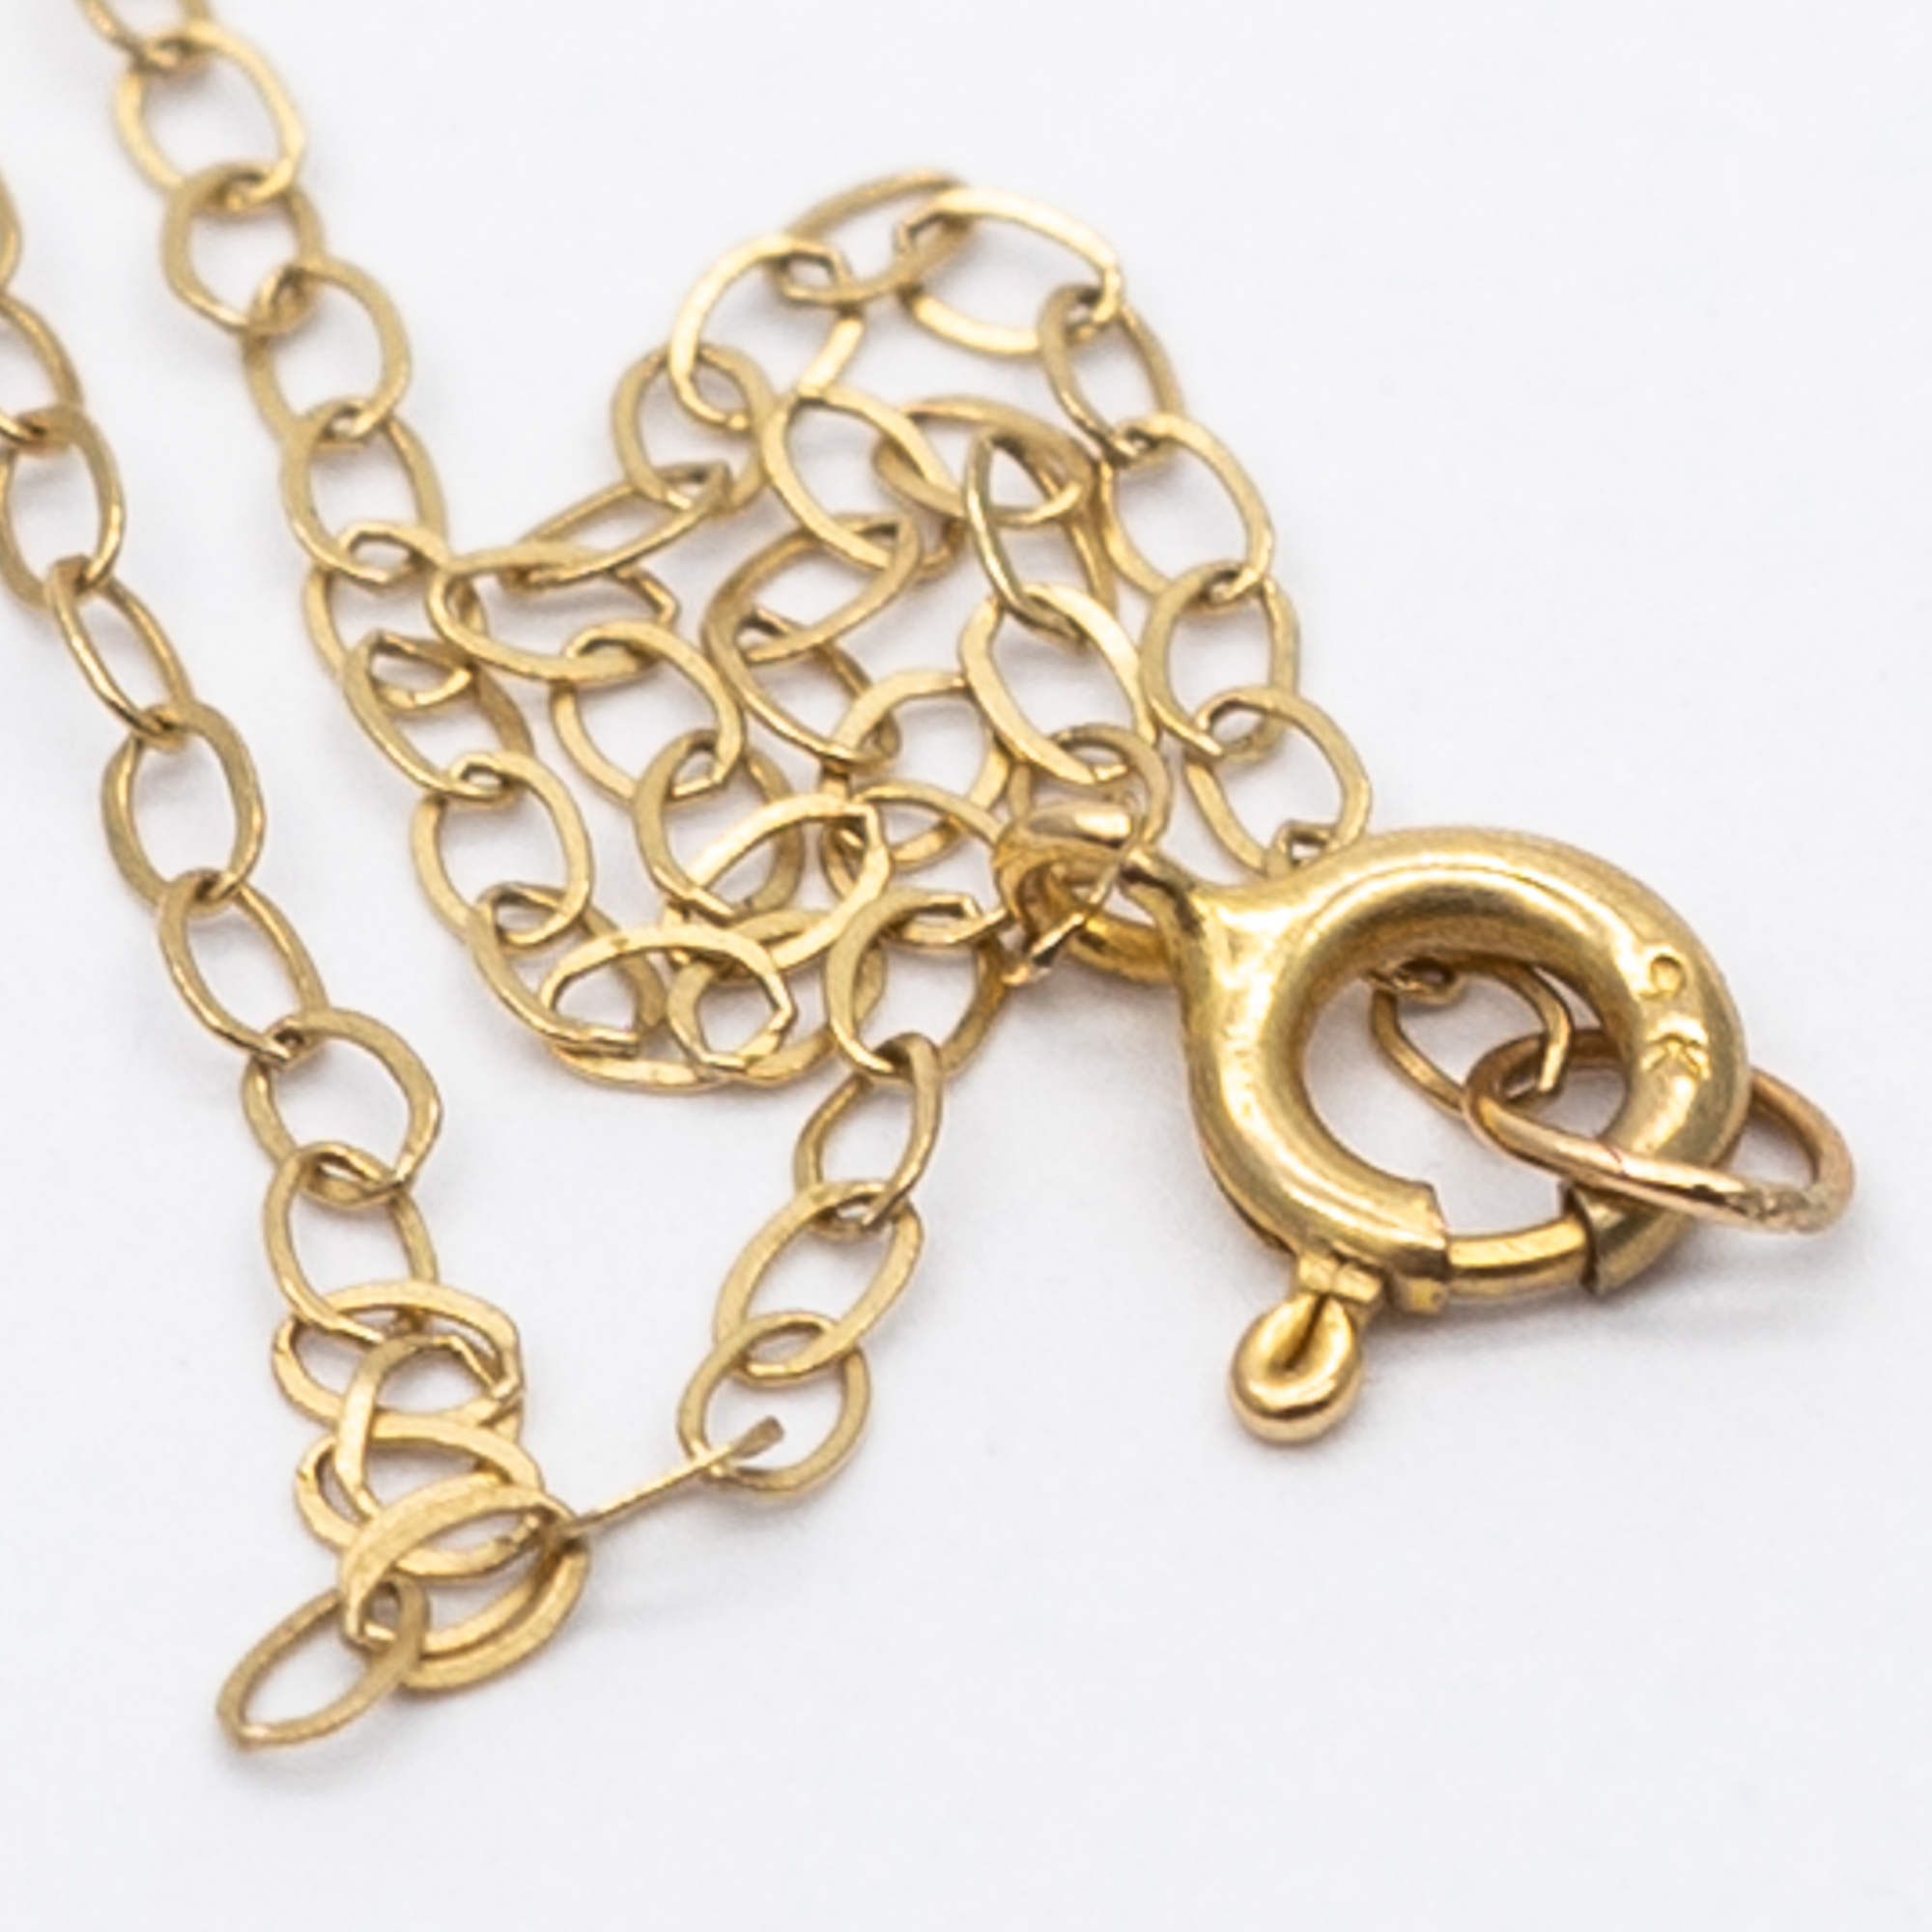 A 9ct yellow gold pendant and chain - Image 3 of 3